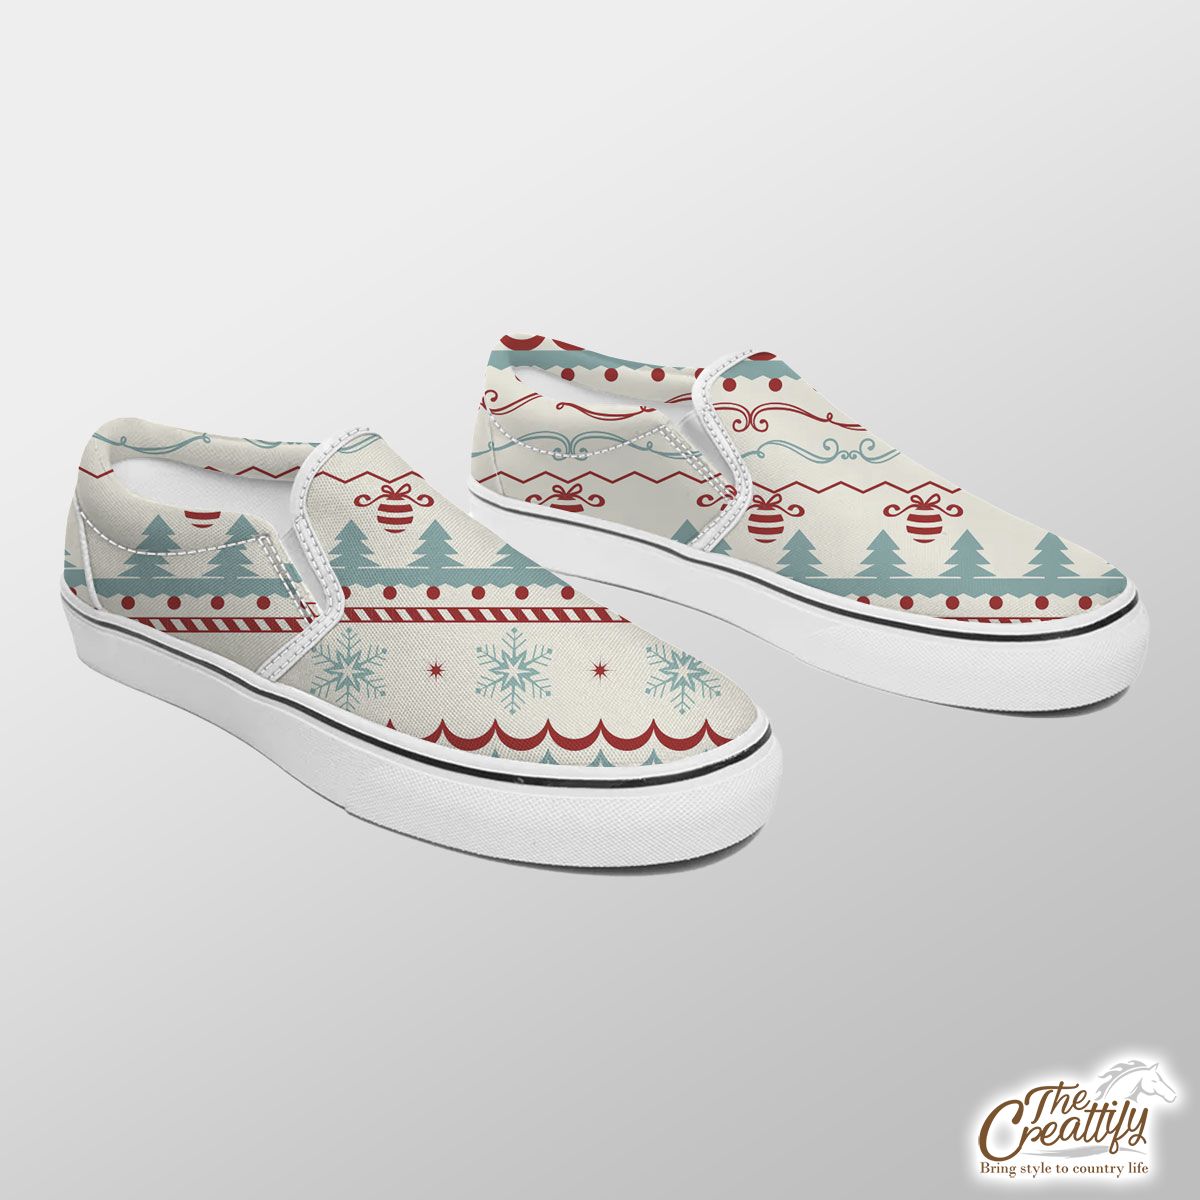 Christmas Gifts, Snowflake And Pine Tree Silhouette Pattern Slip On Sneakers